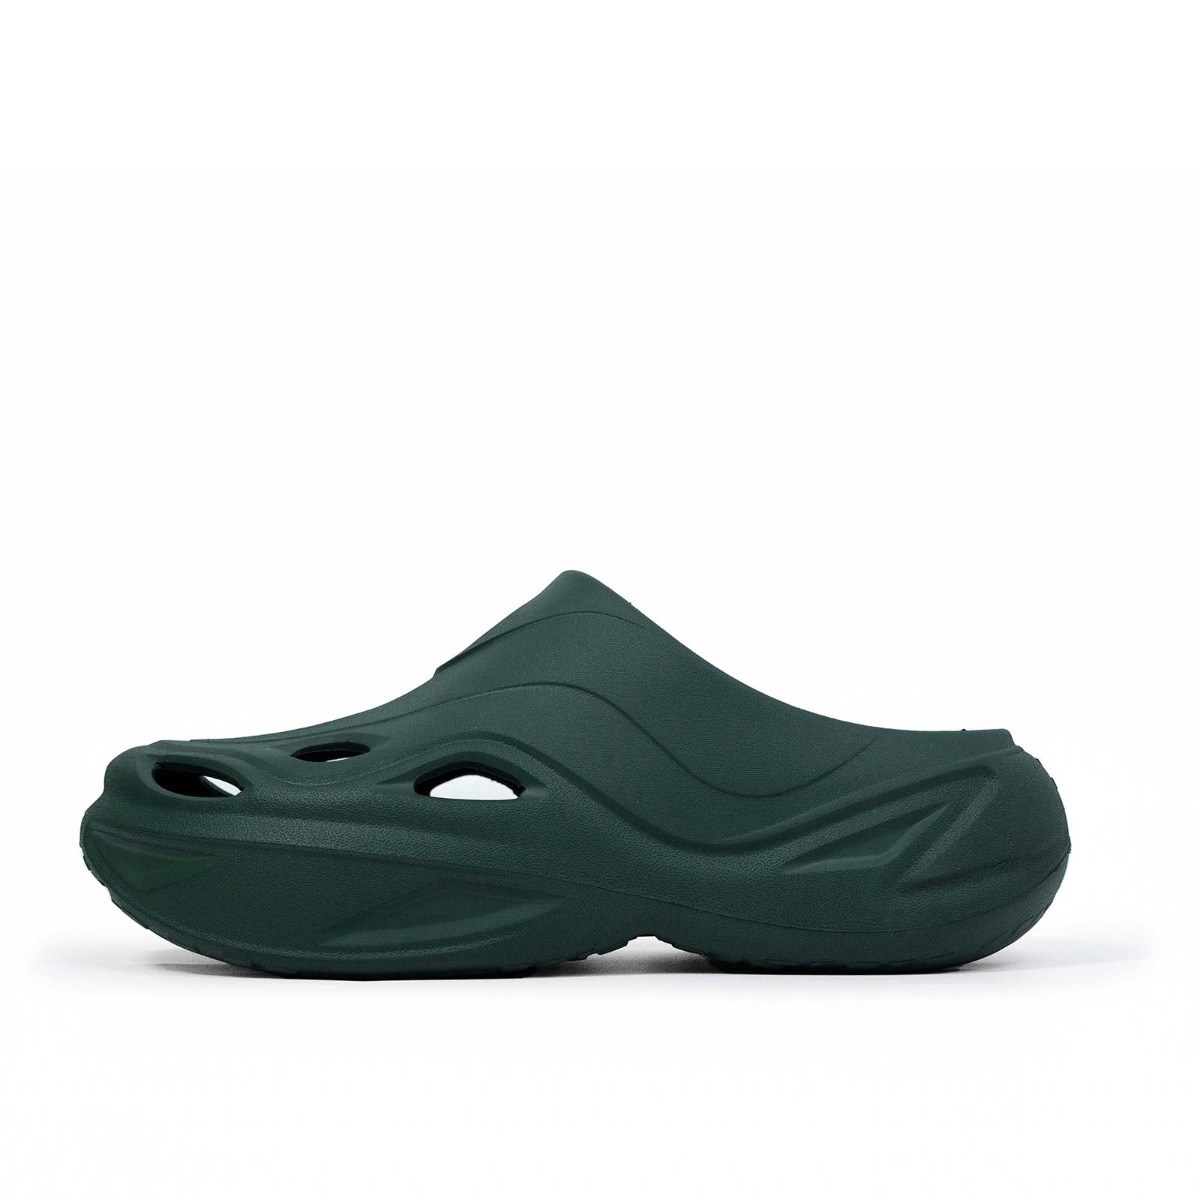 JEAN FOREST GREEN CLOGS